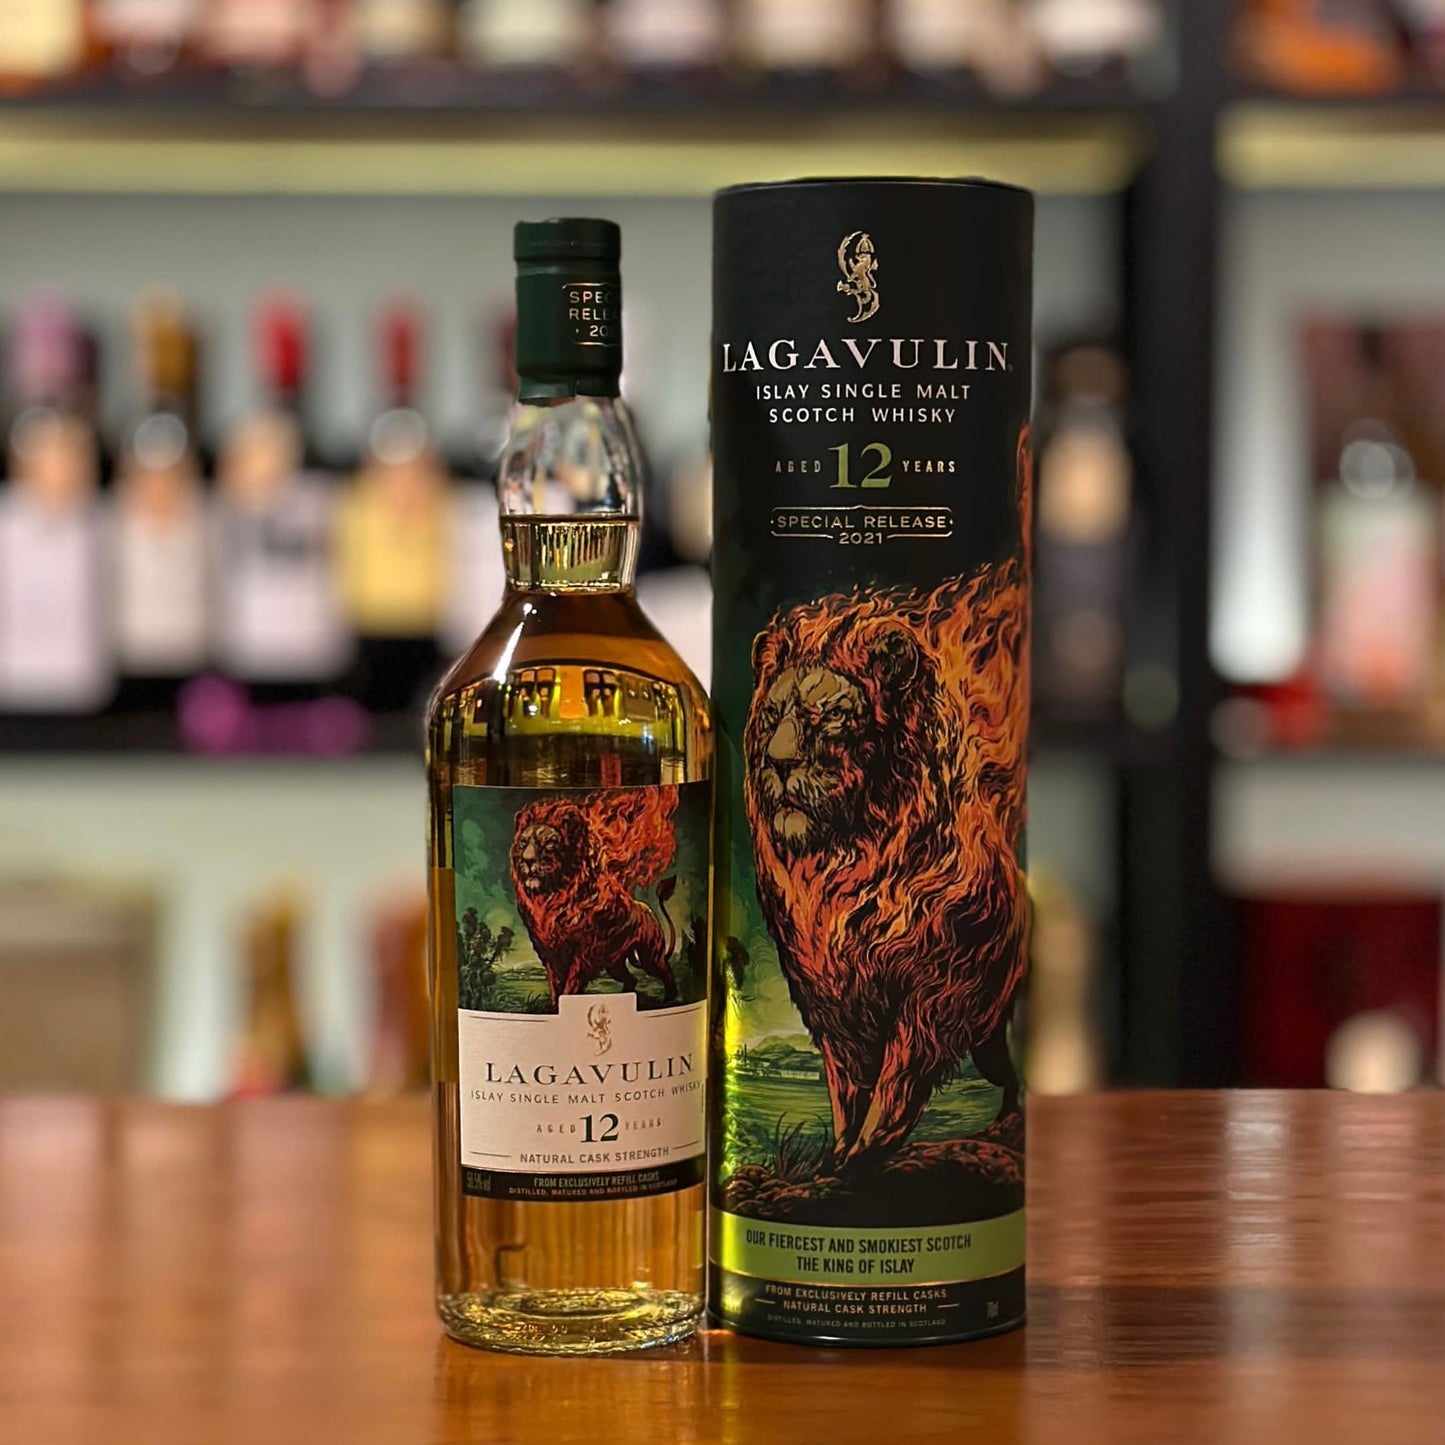 Lagavulin 12 Year Old Diageo Special Release 2021 Single Malt Scotch Whisky